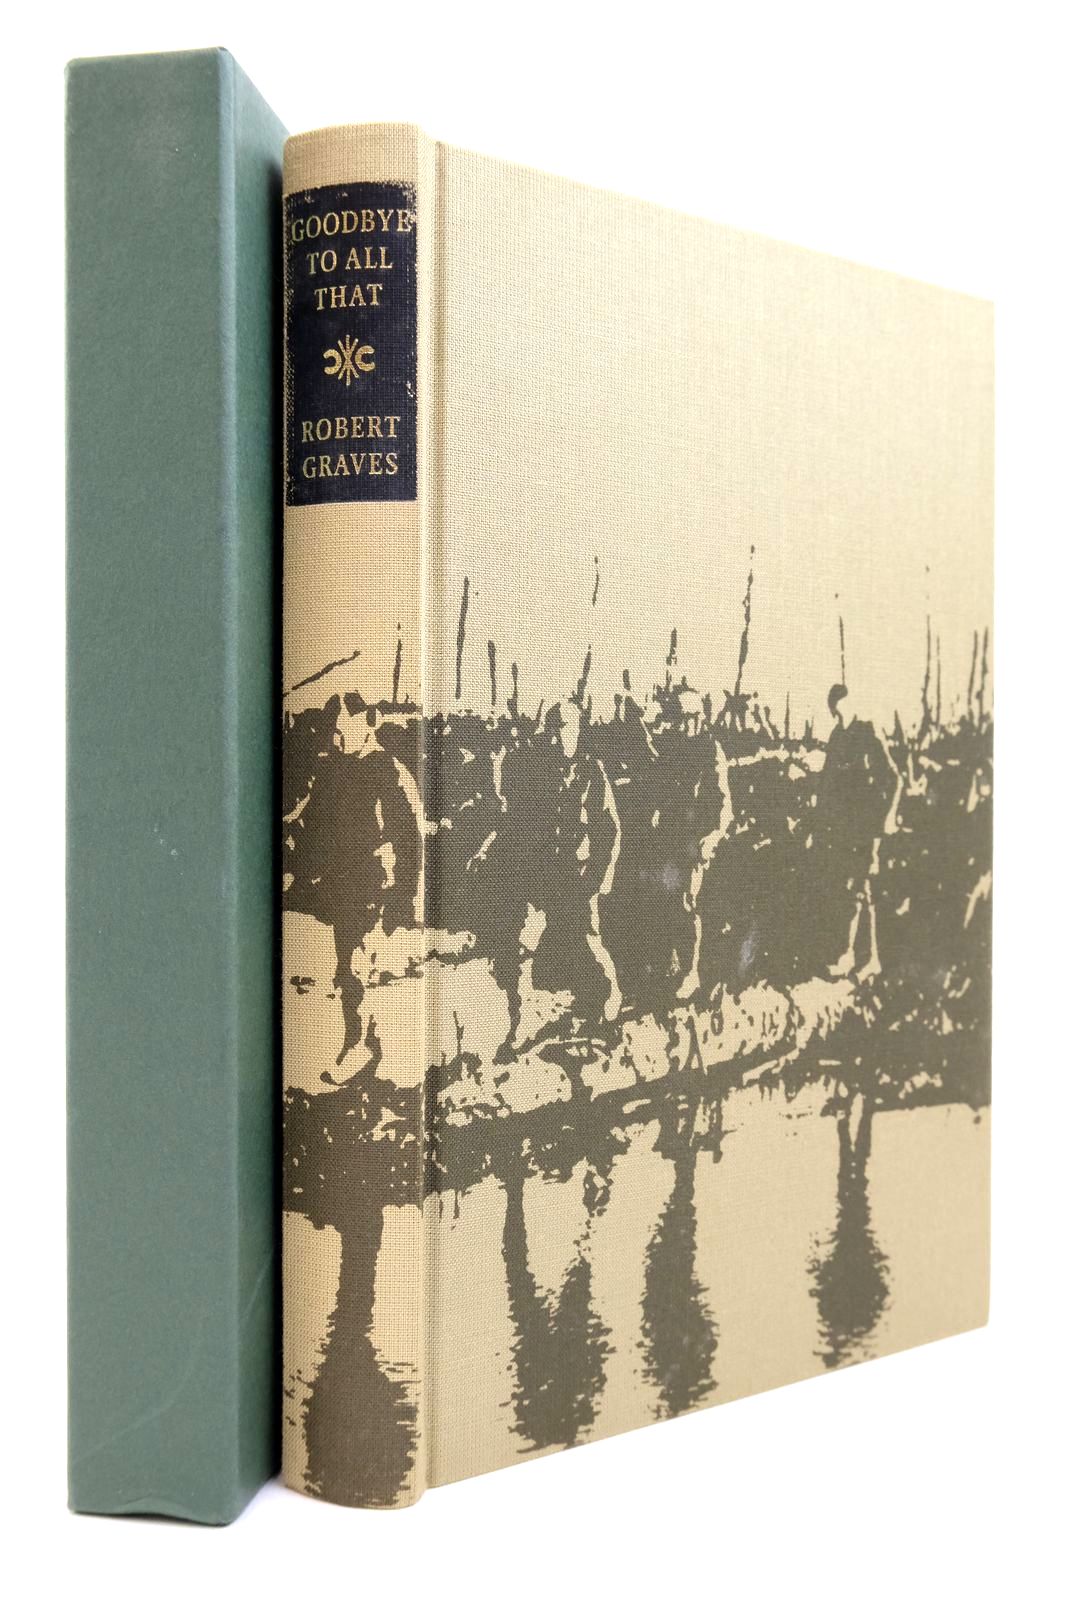 Photo of GOODBYE TO ALL THAT written by Graves, Robert Trevelyan, Raleigh published by Folio Society (STOCK CODE: 2139220)  for sale by Stella & Rose's Books